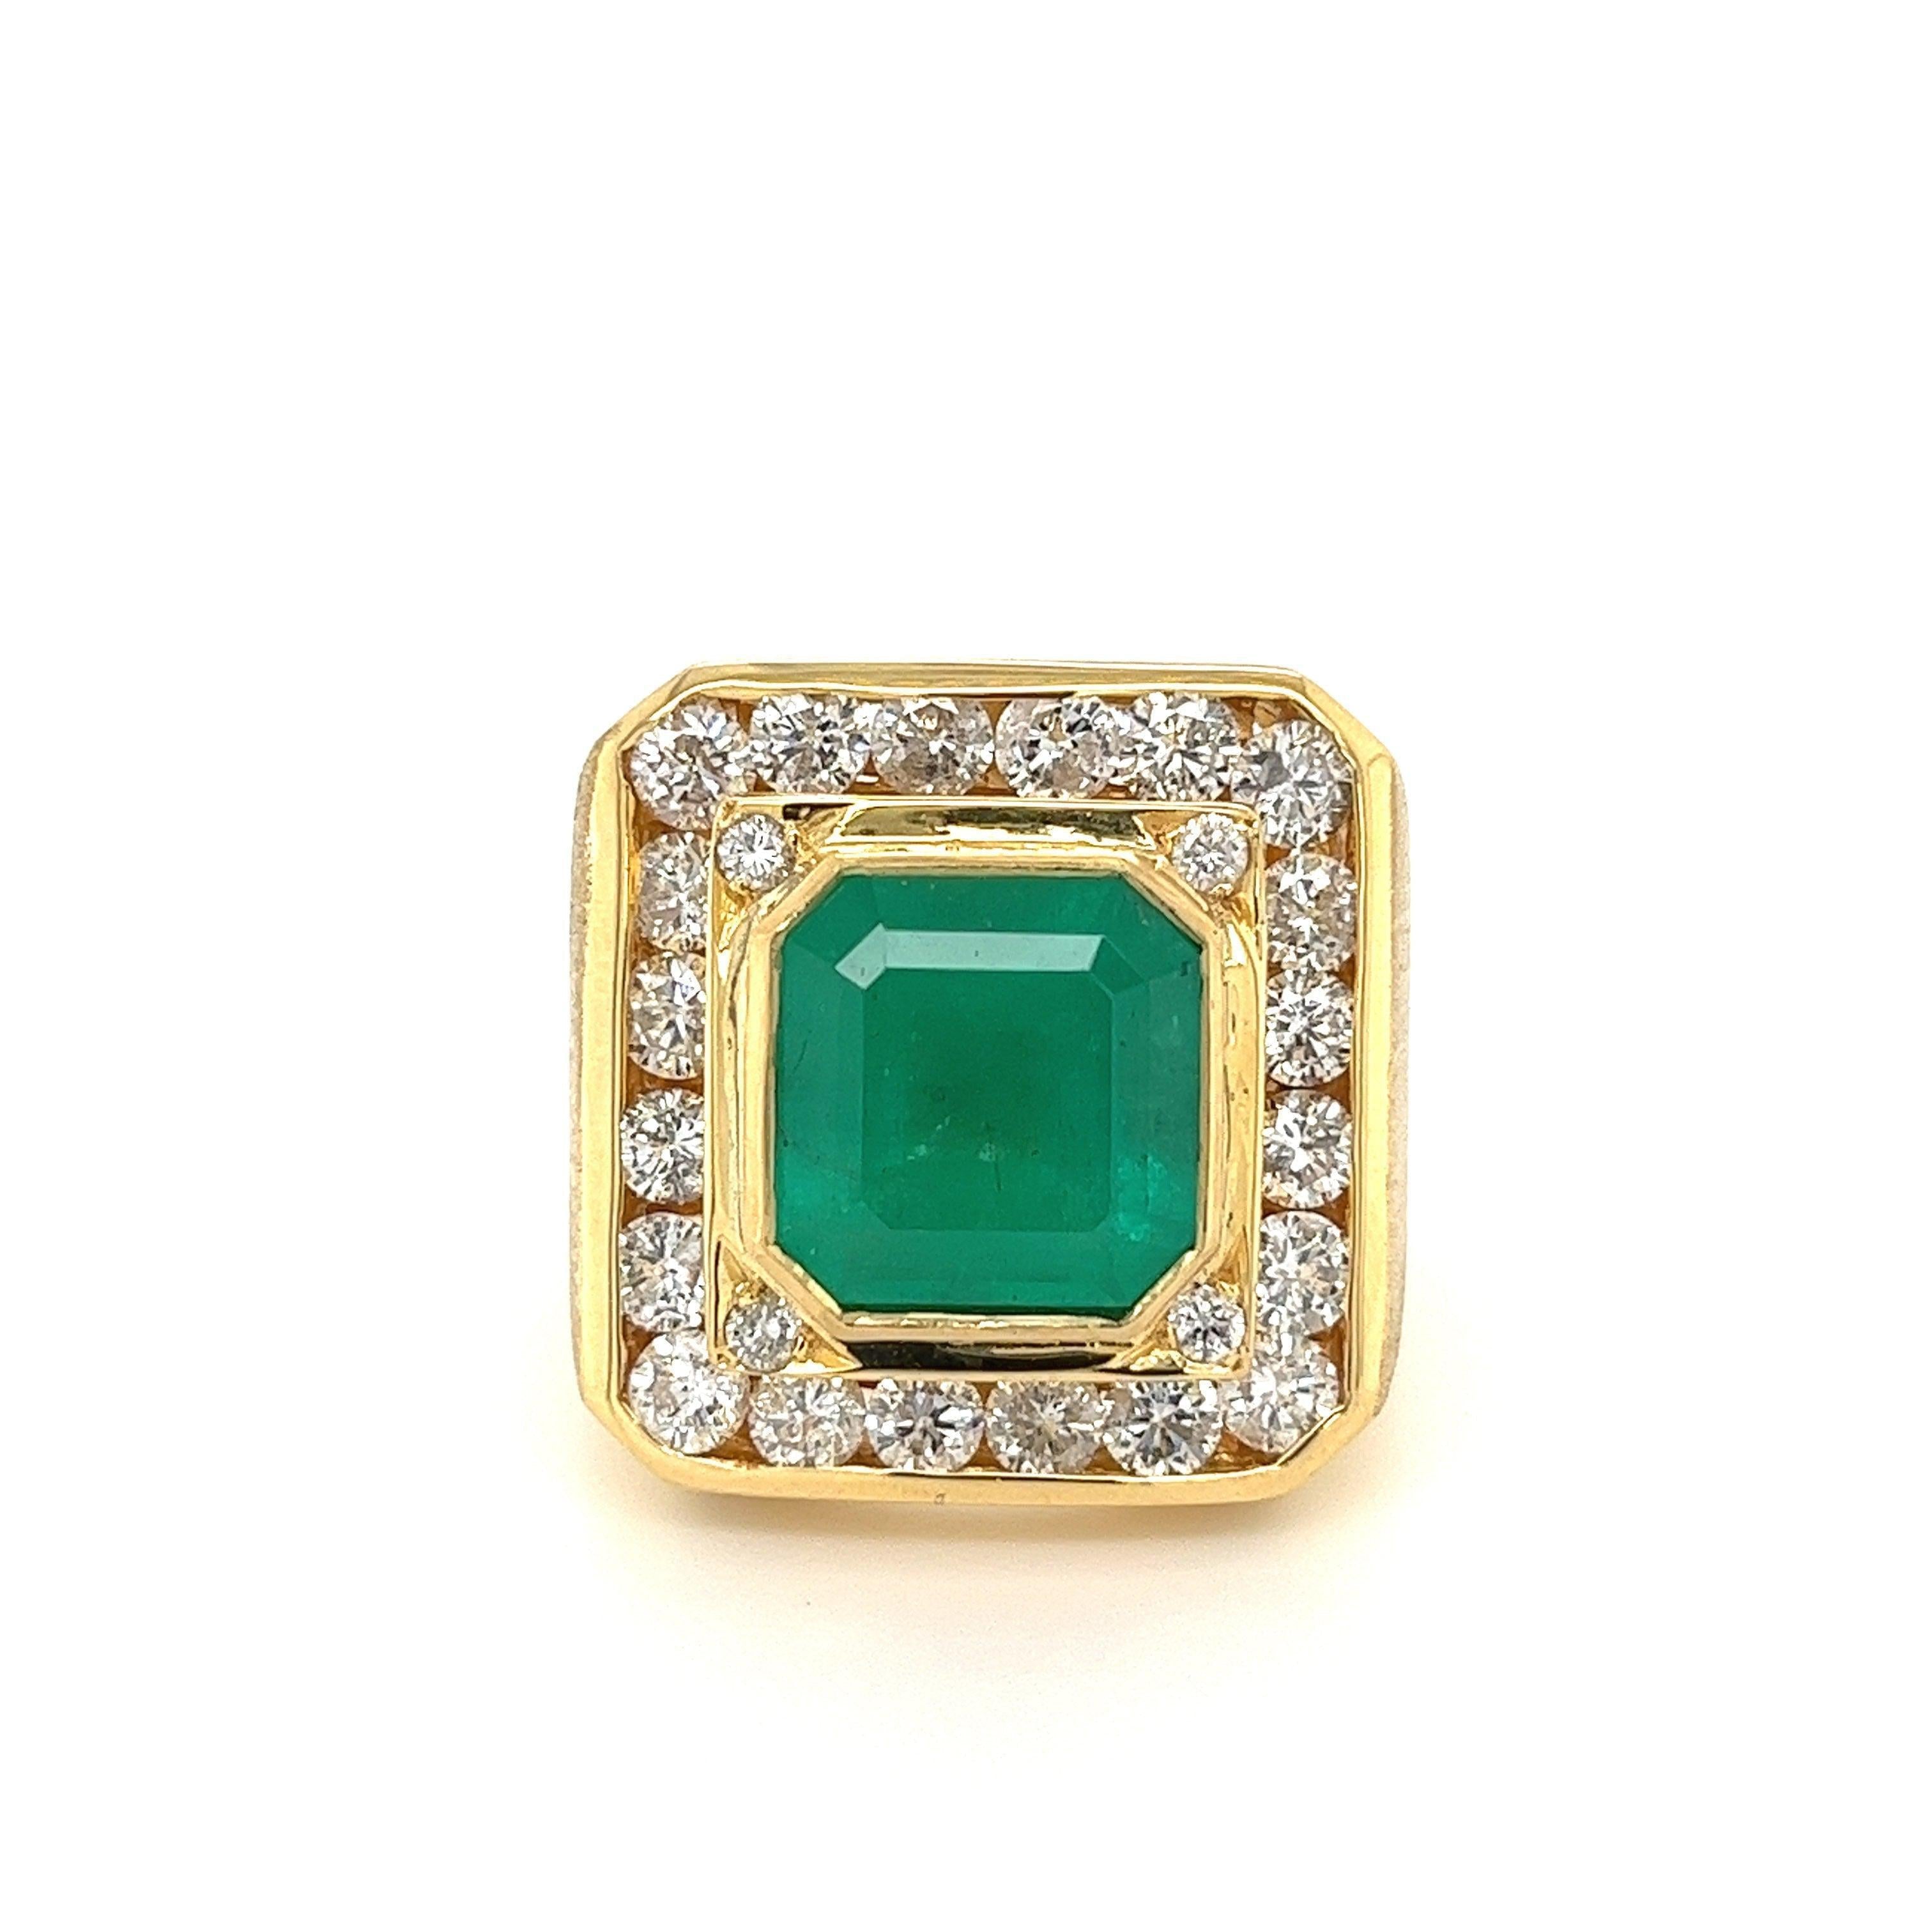 5 Carat Colombian Emerald Mens Ring With Round Diamond Halo in 18k Yellow Gold - Rings